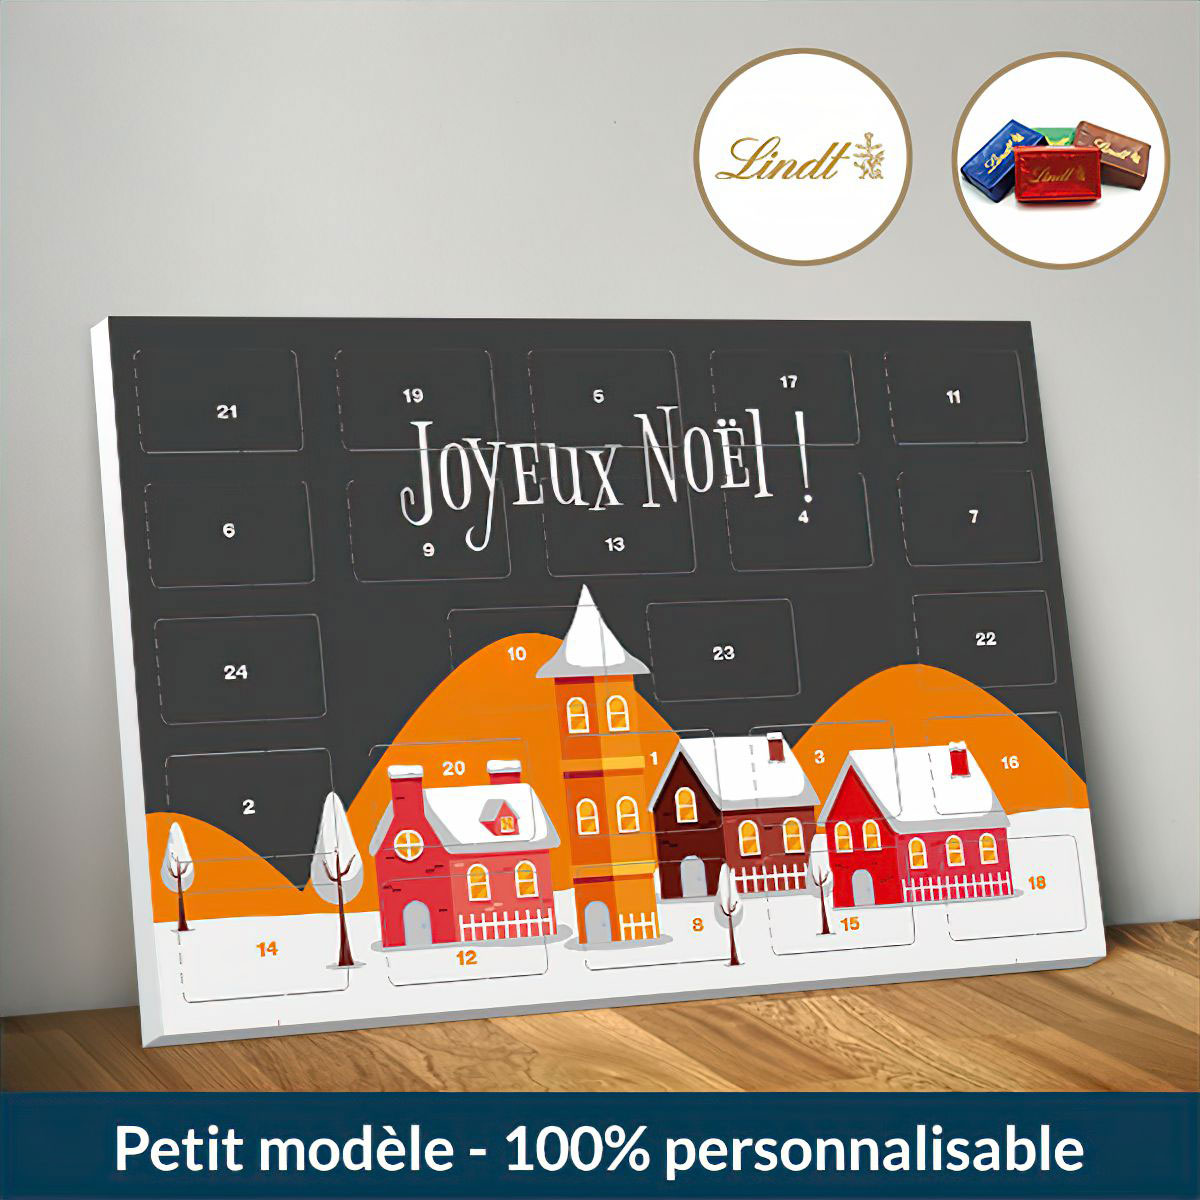 Calendrier avent personnalise lindt 2013 2014